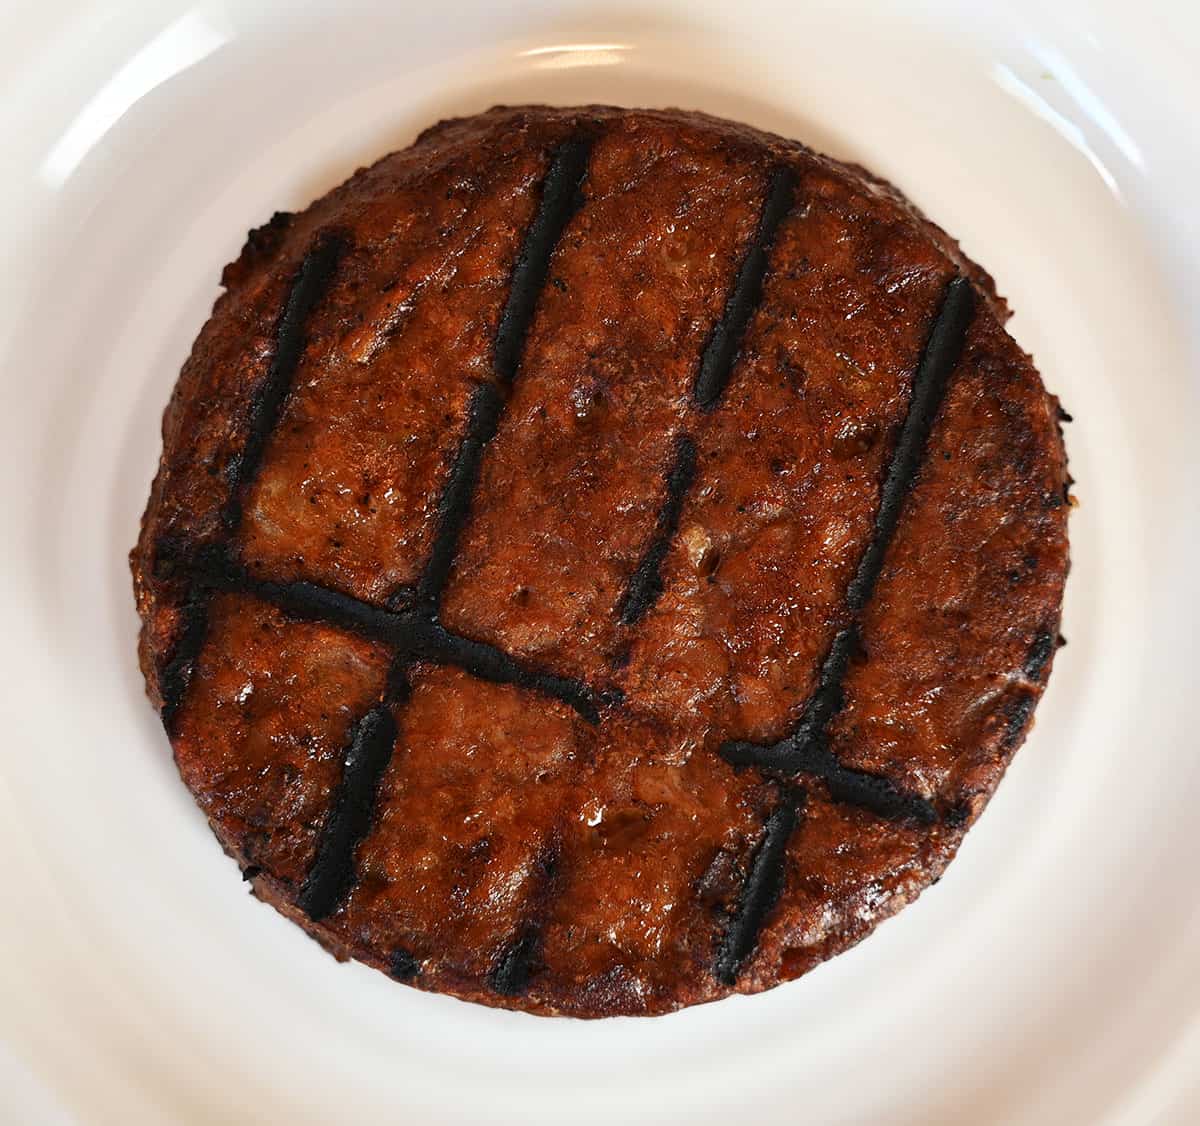 Closeup image of one patty, cooked and on a white plate.